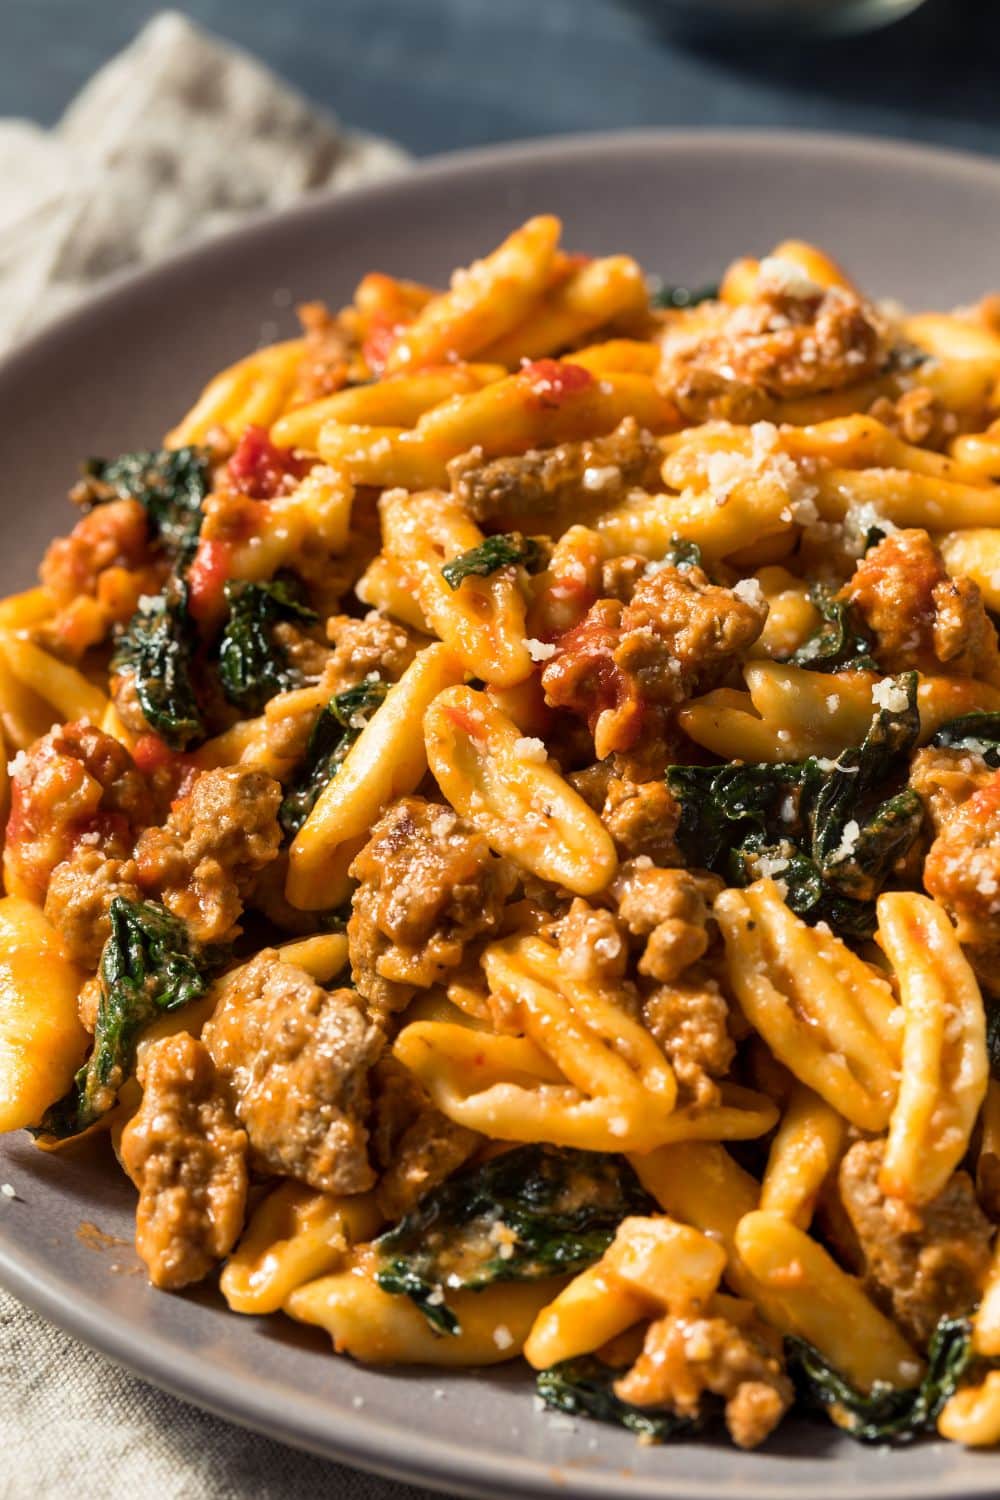 15 Best Sausage Pasta Recipes for Dinner - Insanely Good